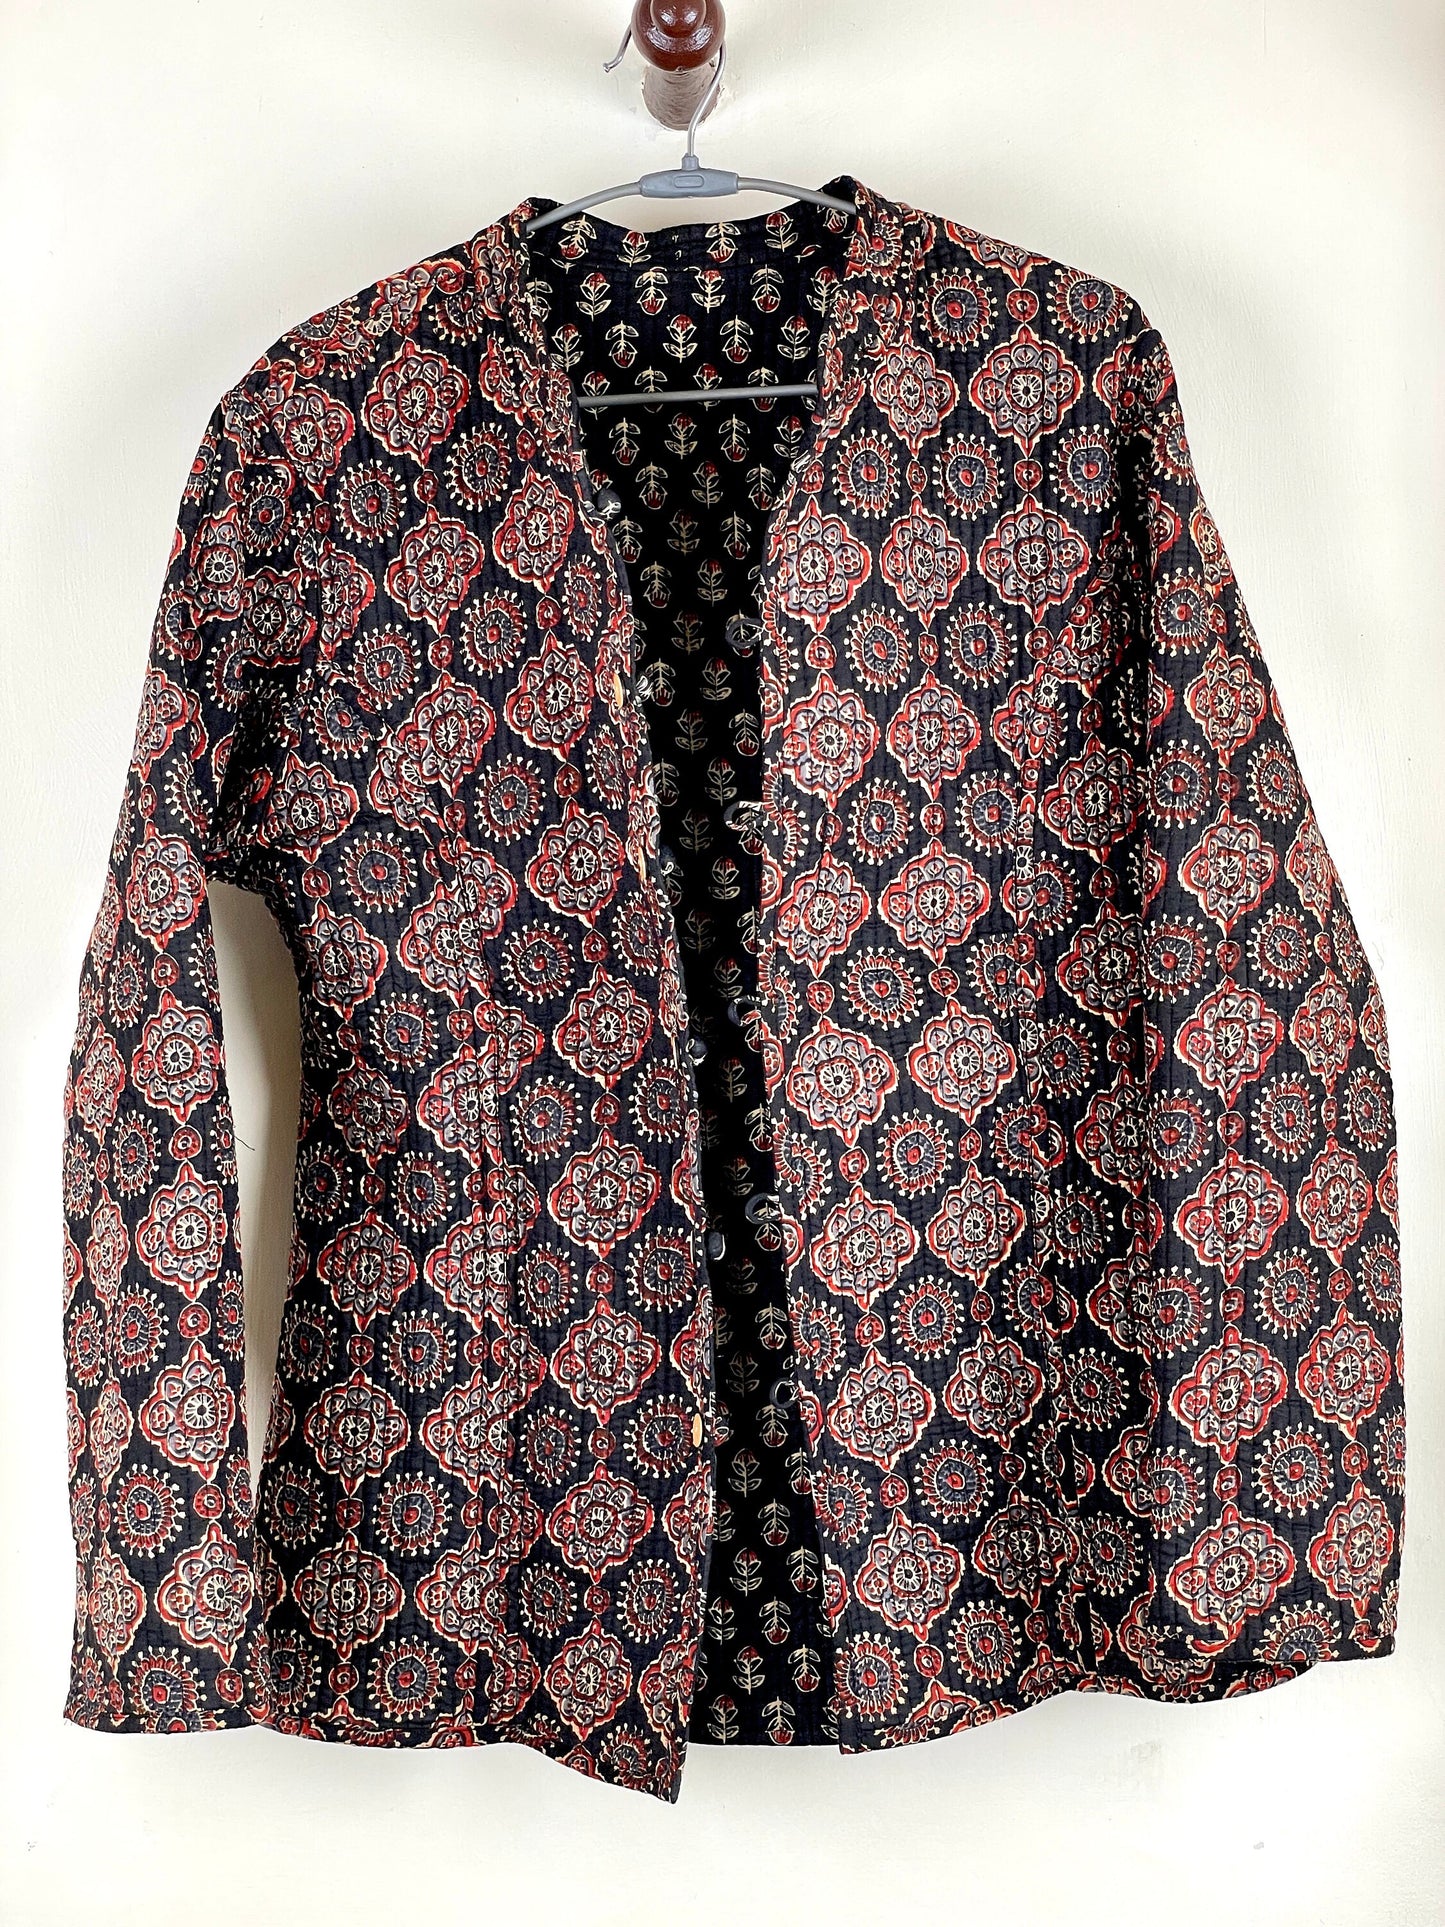 Indian Handmade Quilted Cotton Fabric Jacket Stylish Black & Red Floral Women's Coat, Reversible Waistcoat, Christmas Gift for Her